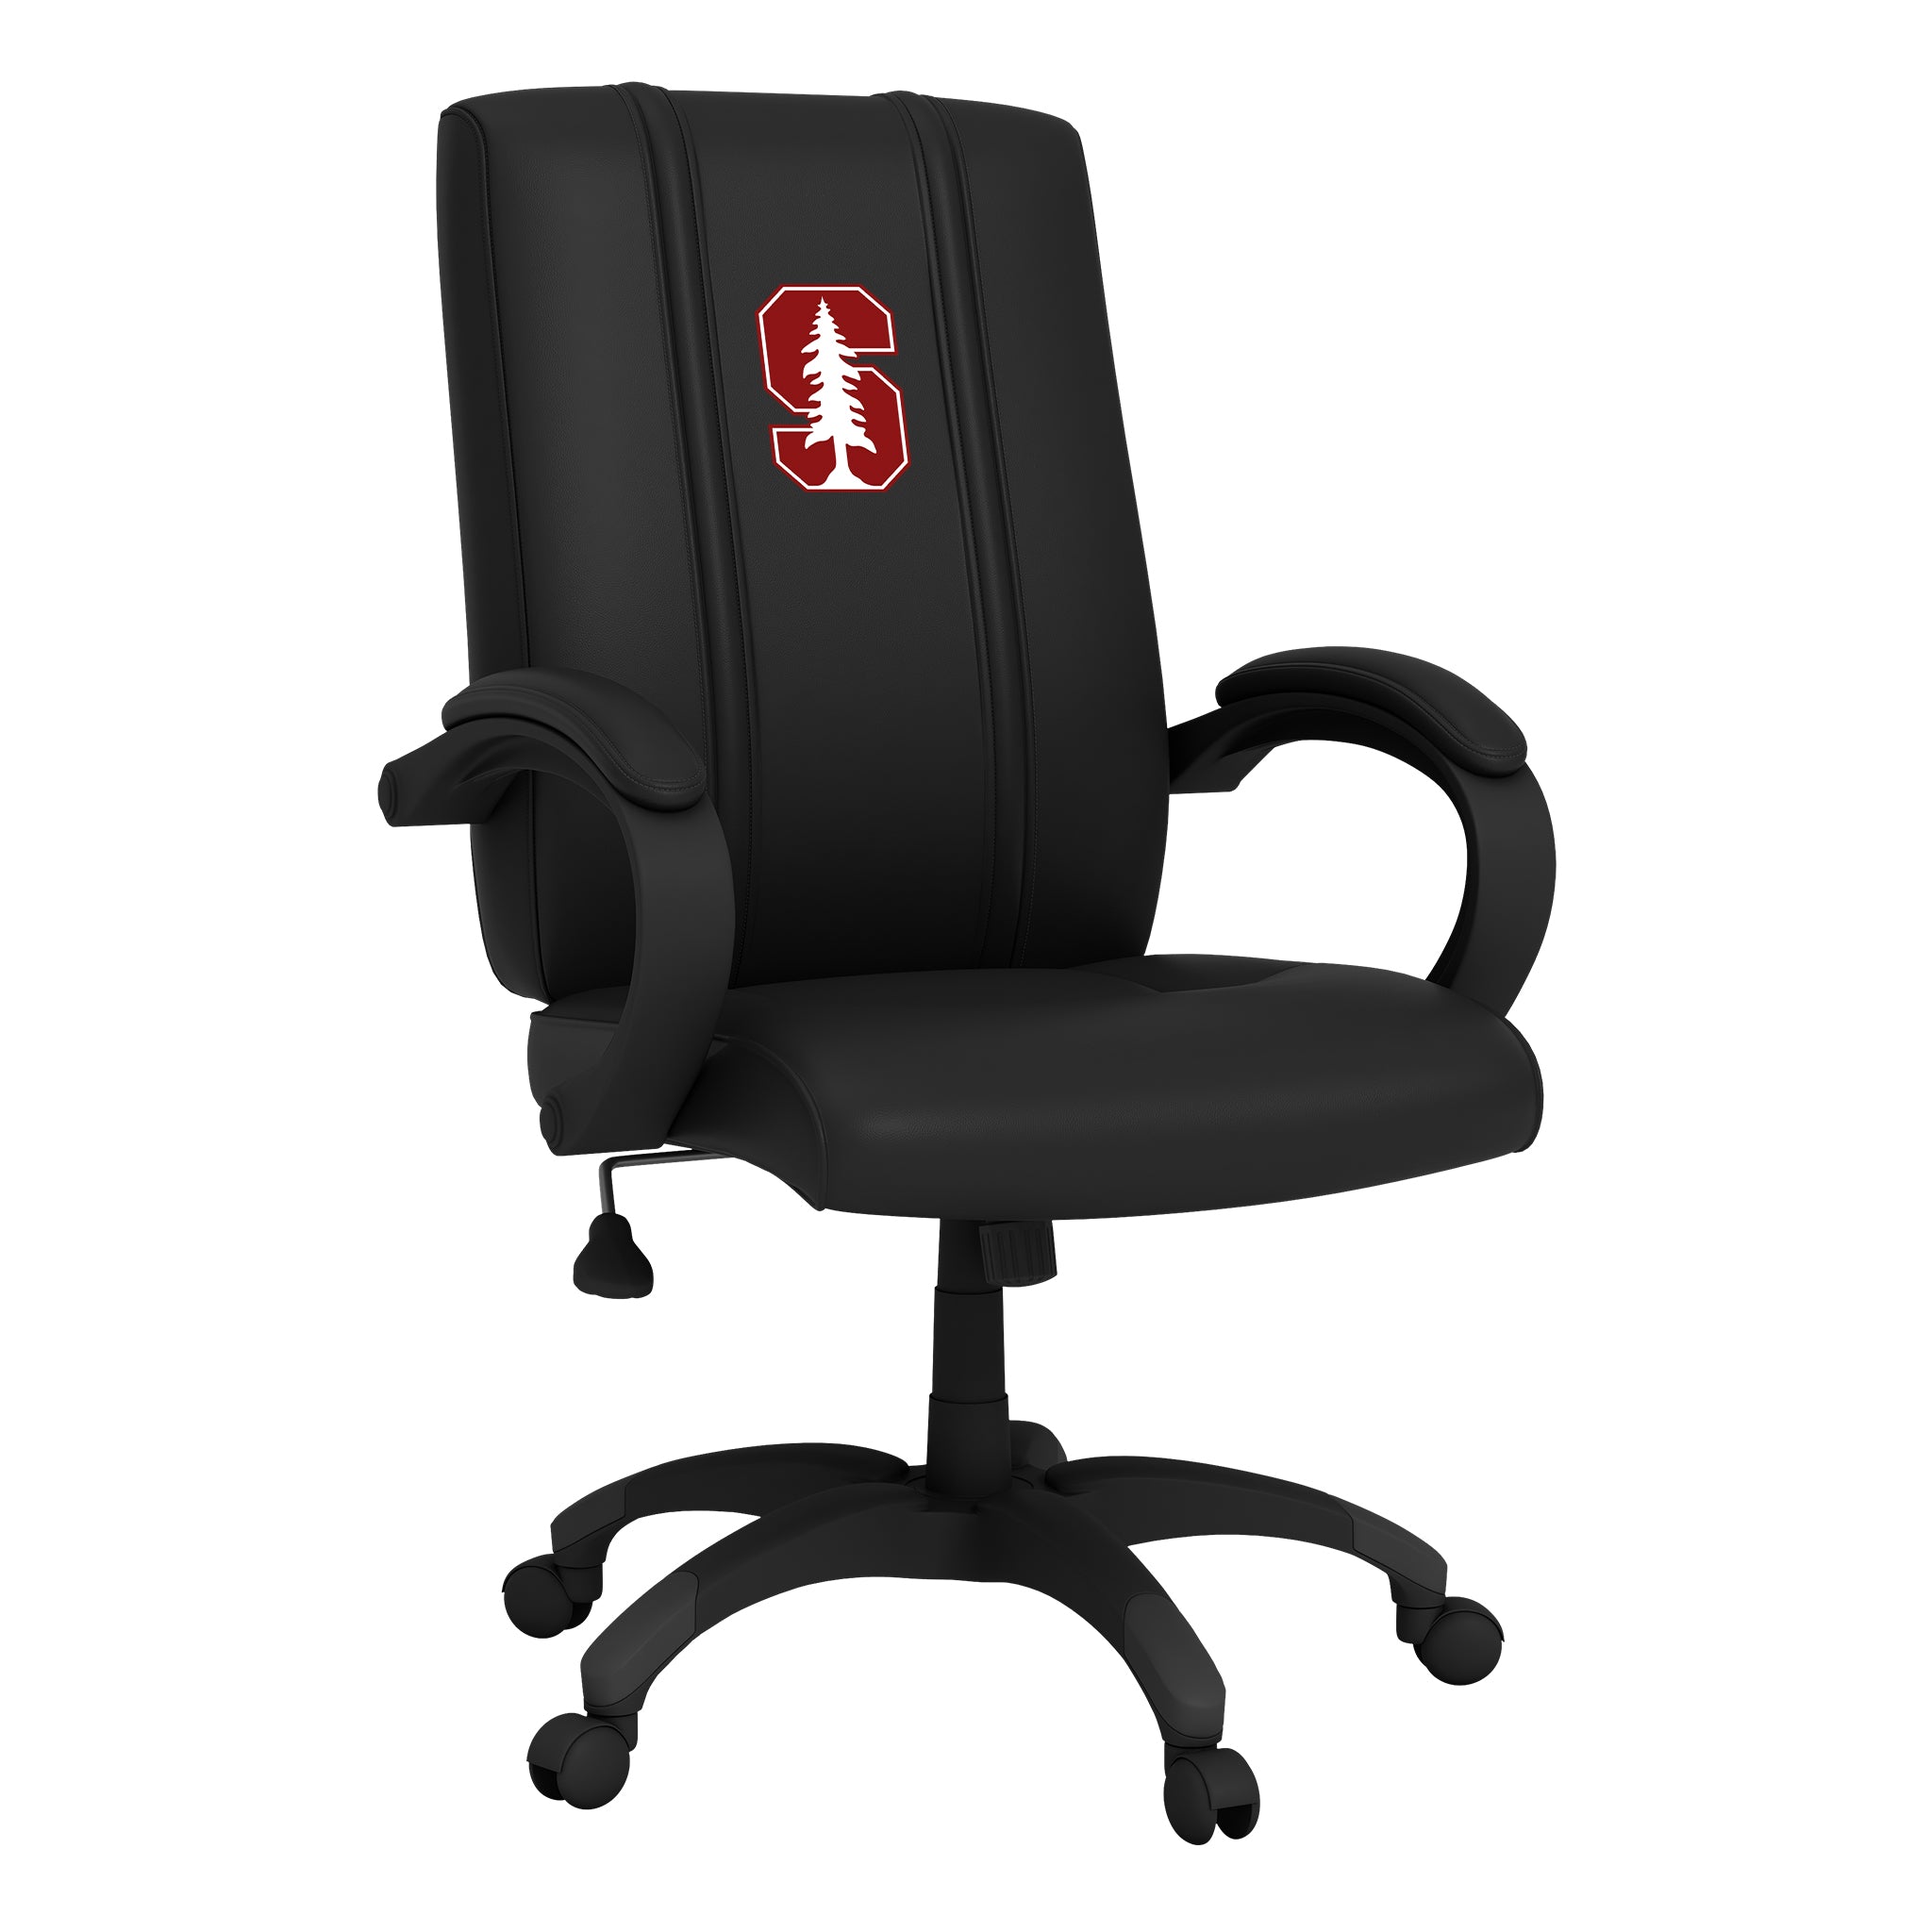 Stanford Cardinals Office Chair 1000 with Stanford Cardinals Logo